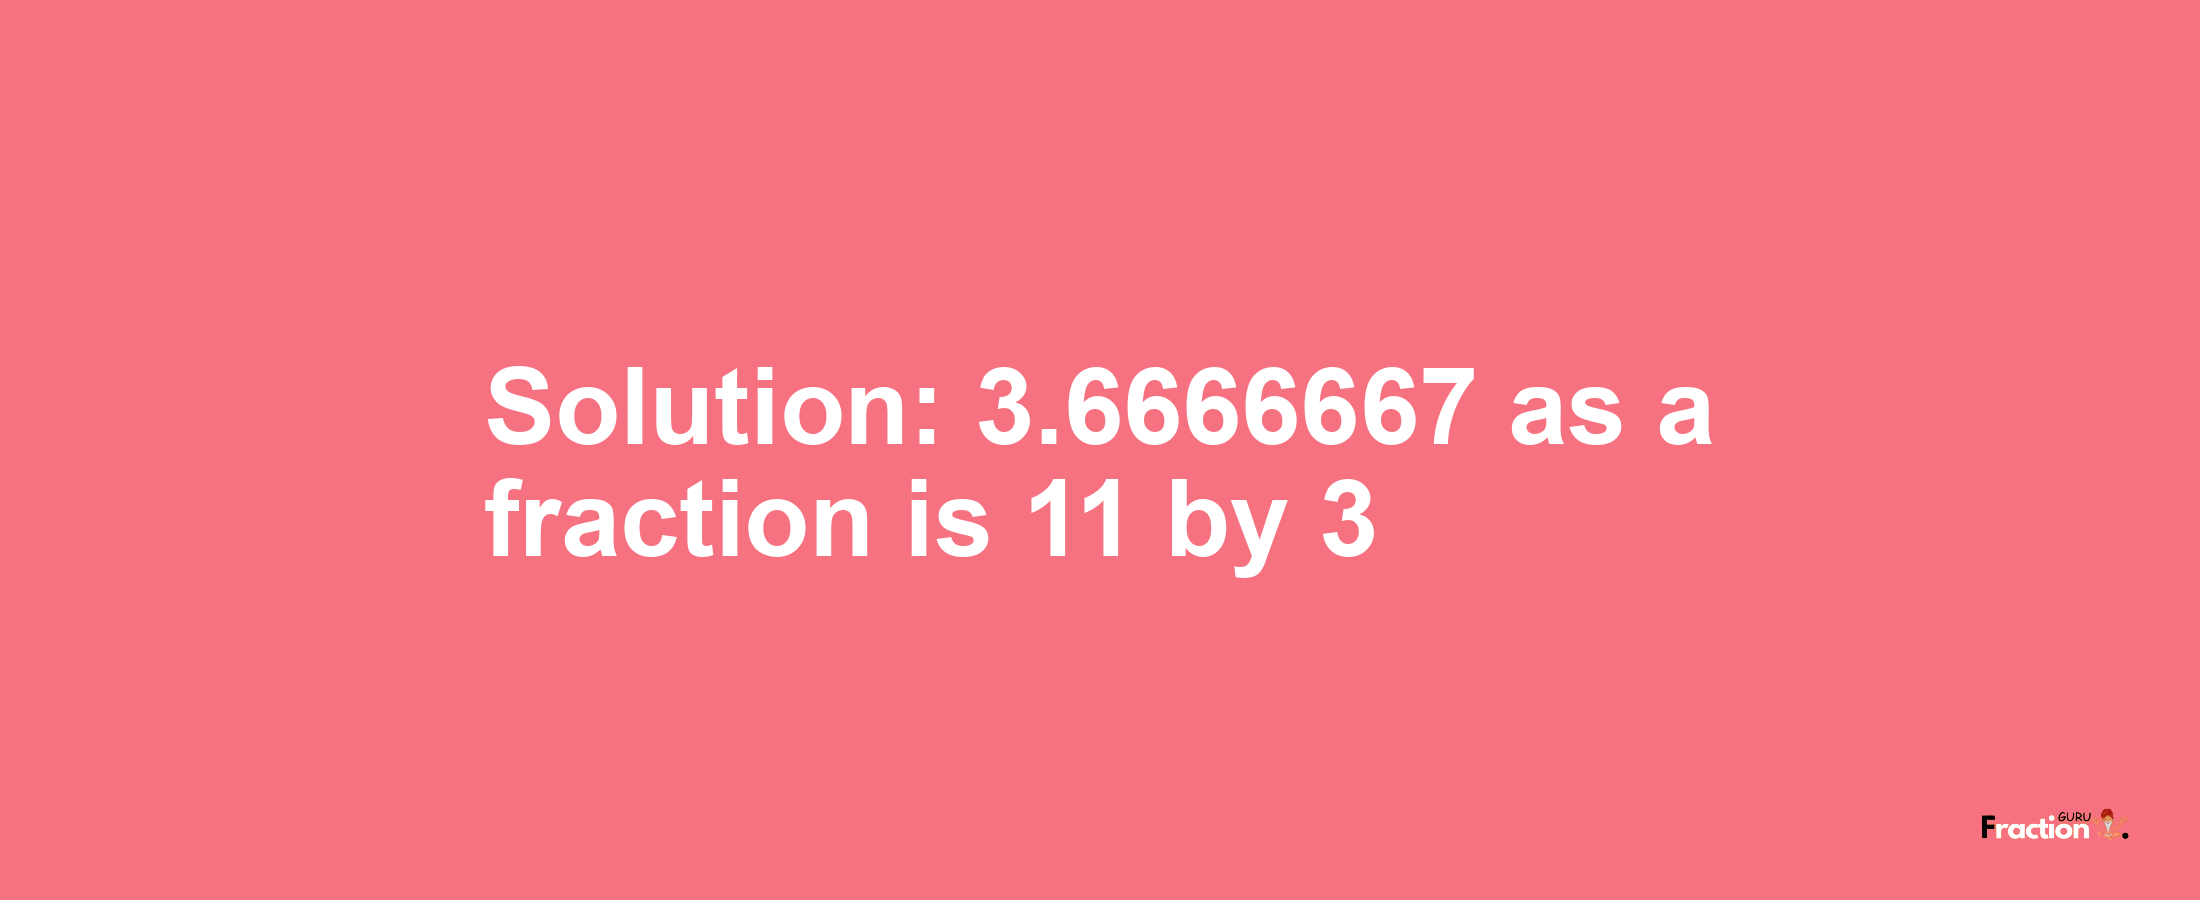 Solution:3.6666667 as a fraction is 11/3